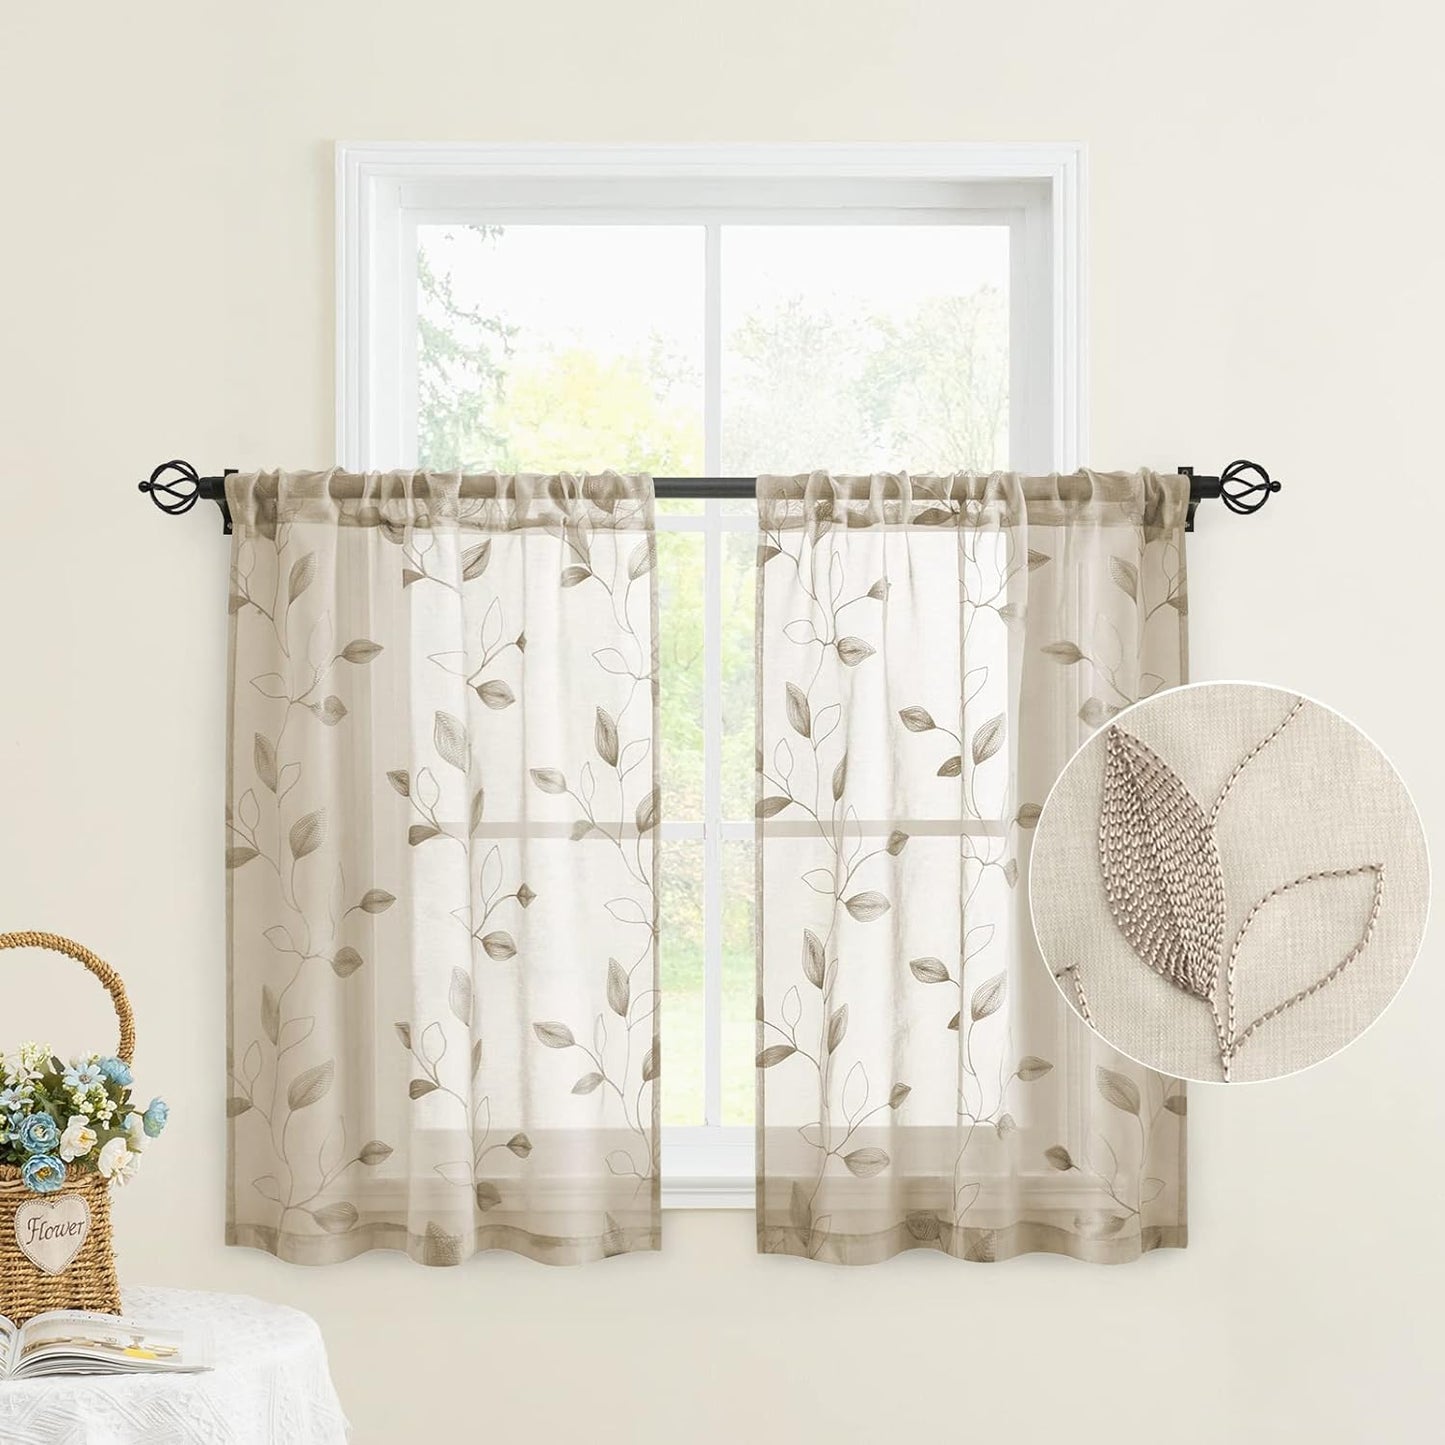 HOMEIDEAS Sage Green Sheer Curtains 52 X 63 Inches Length 2 Panels Embroidered Leaf Pattern Pocket Faux Linen Floral Semi Sheer Voile Window Curtains/Drapes for Bedroom Living Room  HOMEIDEAS 2-Taupe/Beige W30" X L36" 